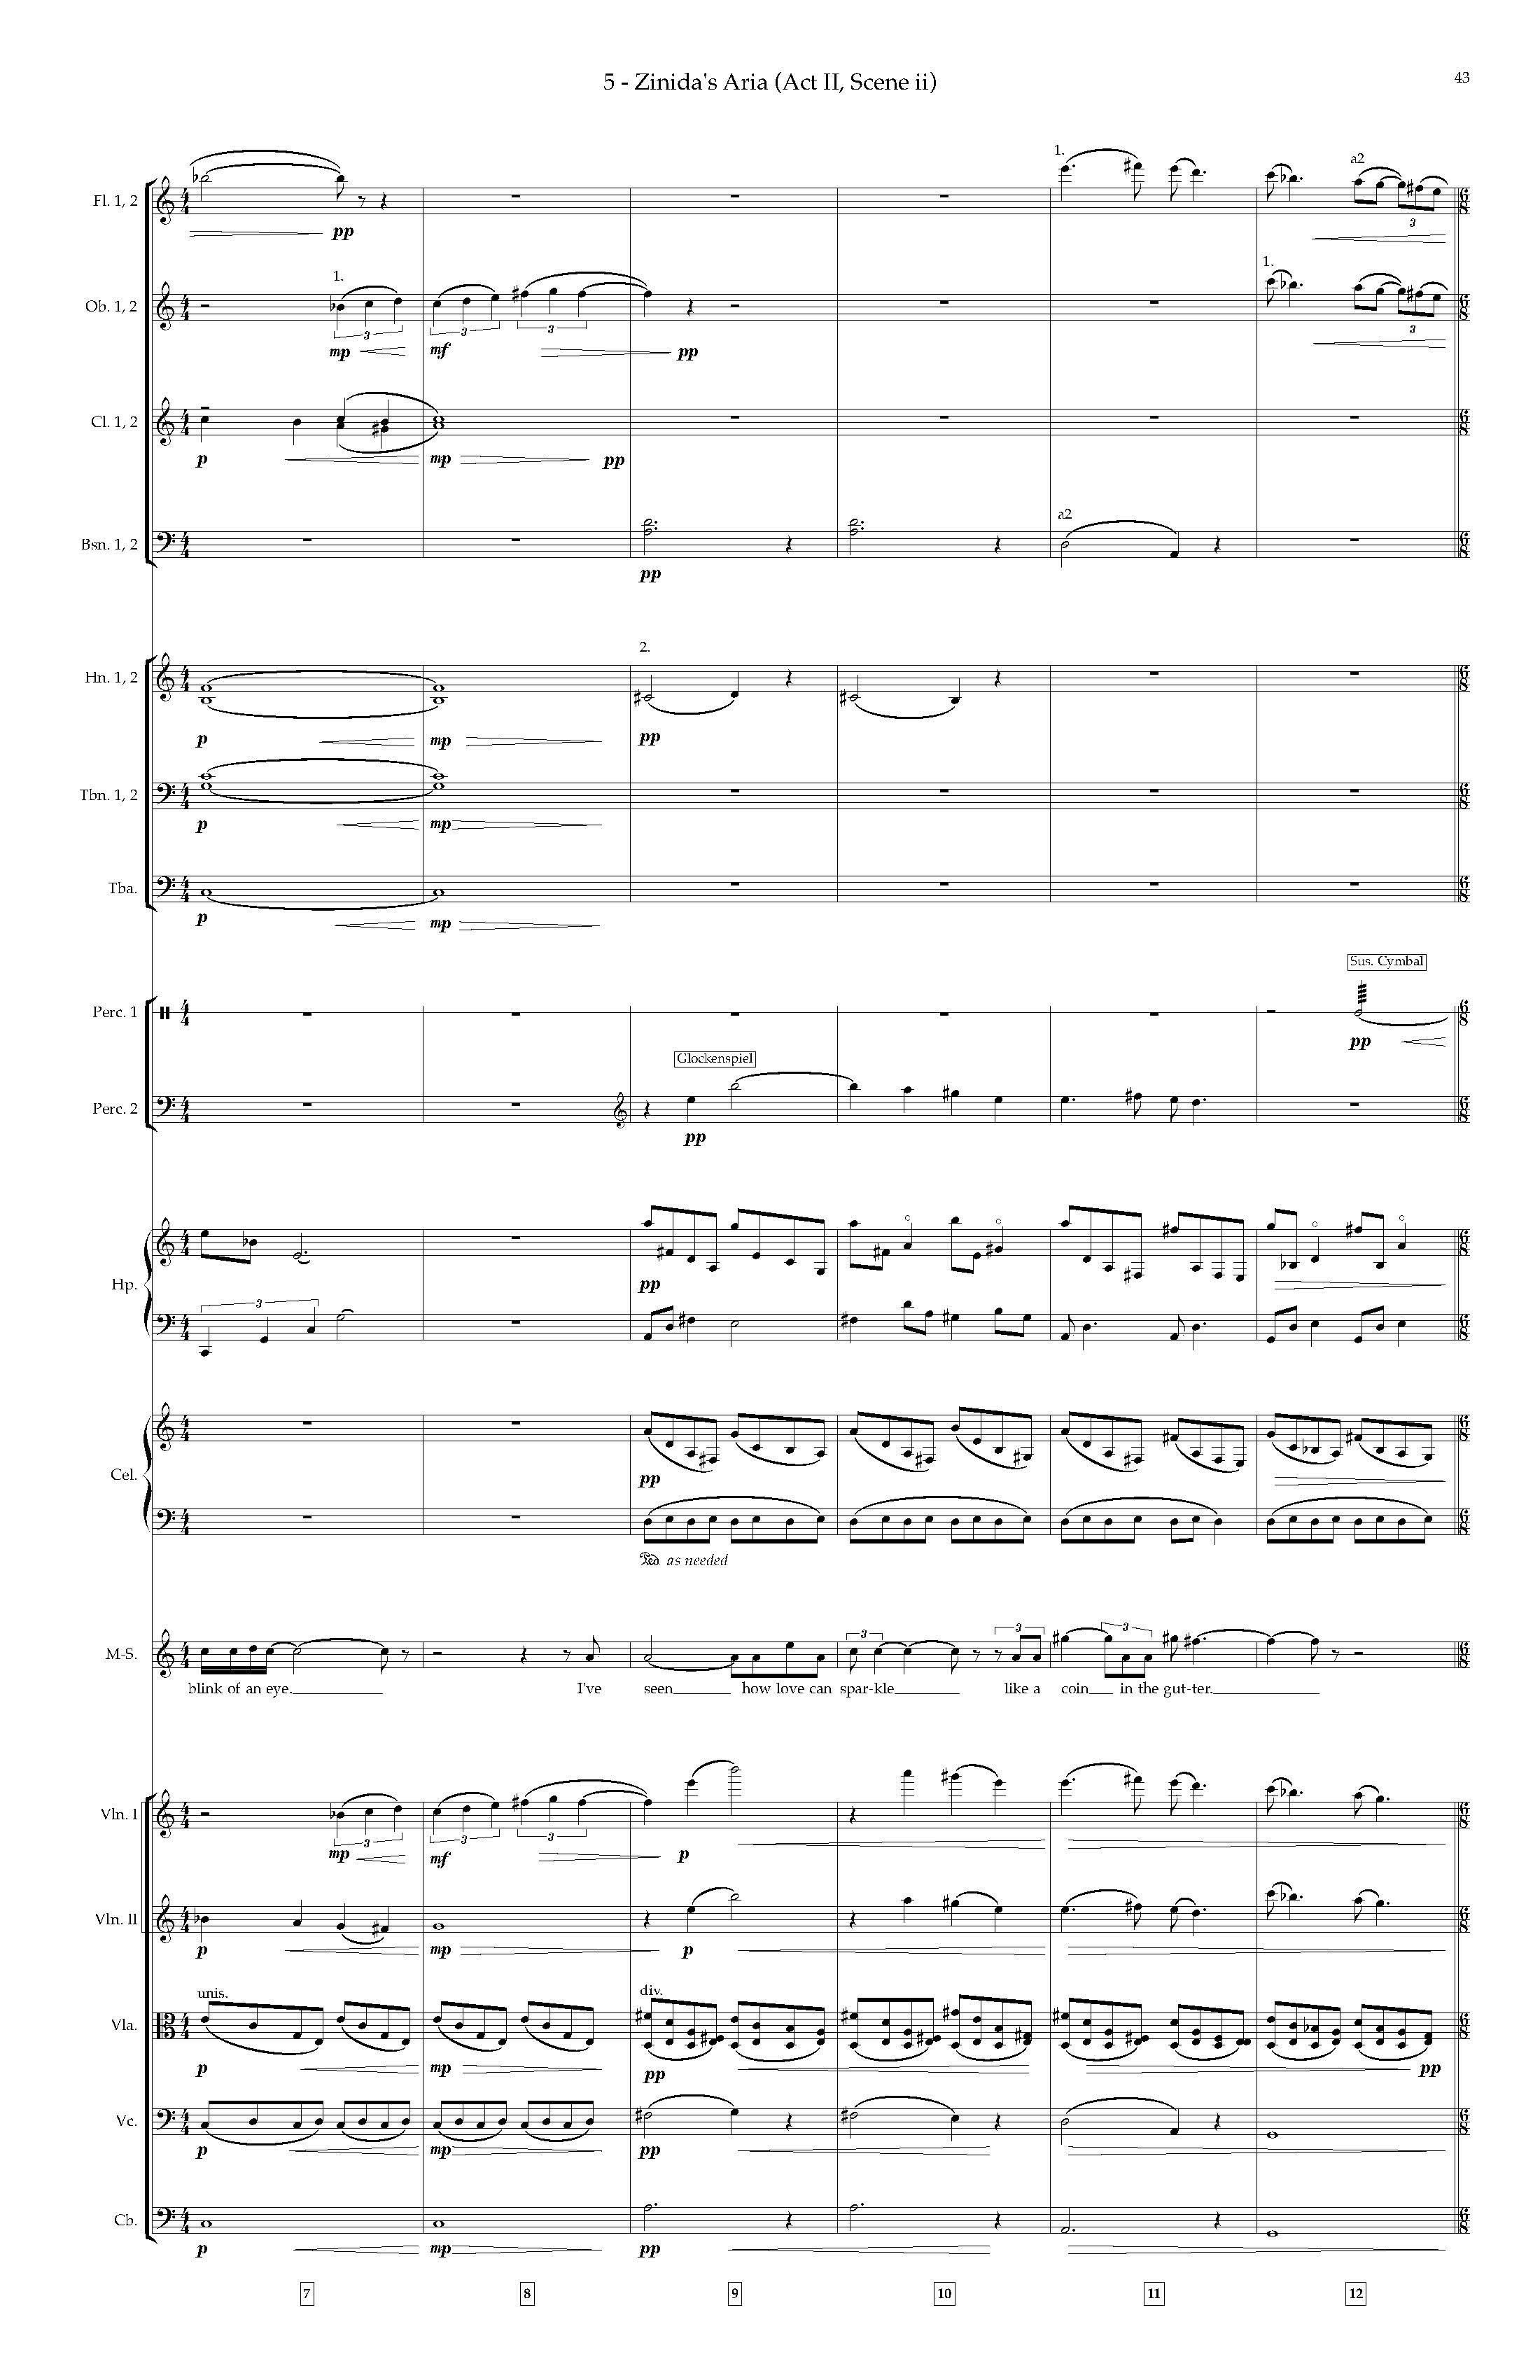 Arias and Interludes from HWGS - Complete Score_Page_49.jpg